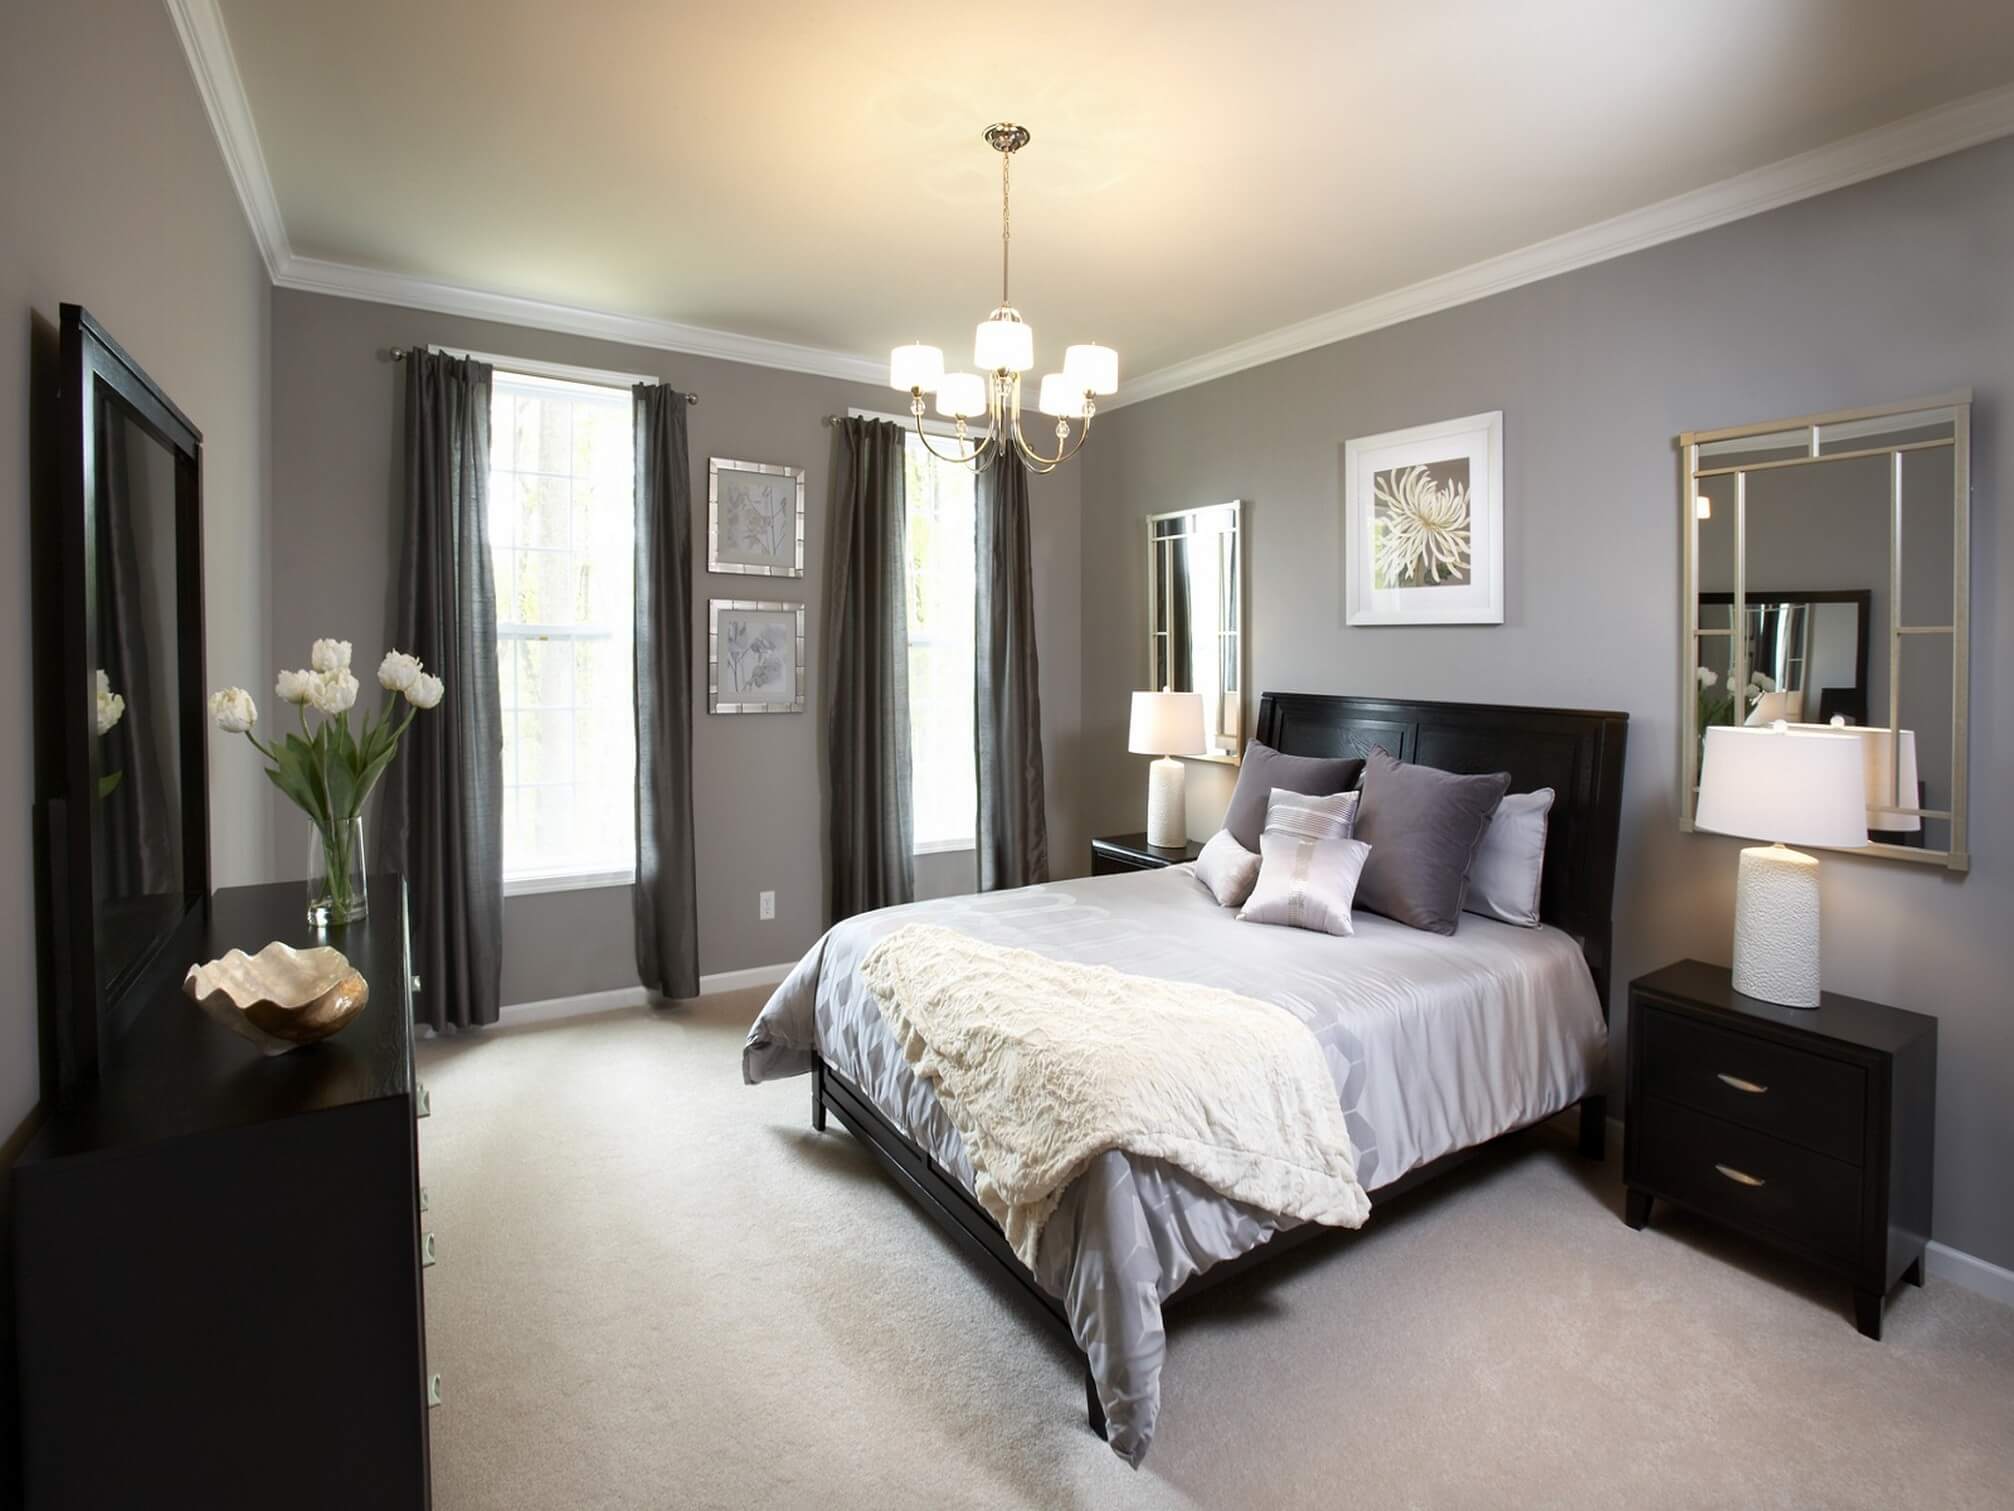 A Crisp and Classy Design Bedroom with Clean Black and Cool Shades ...